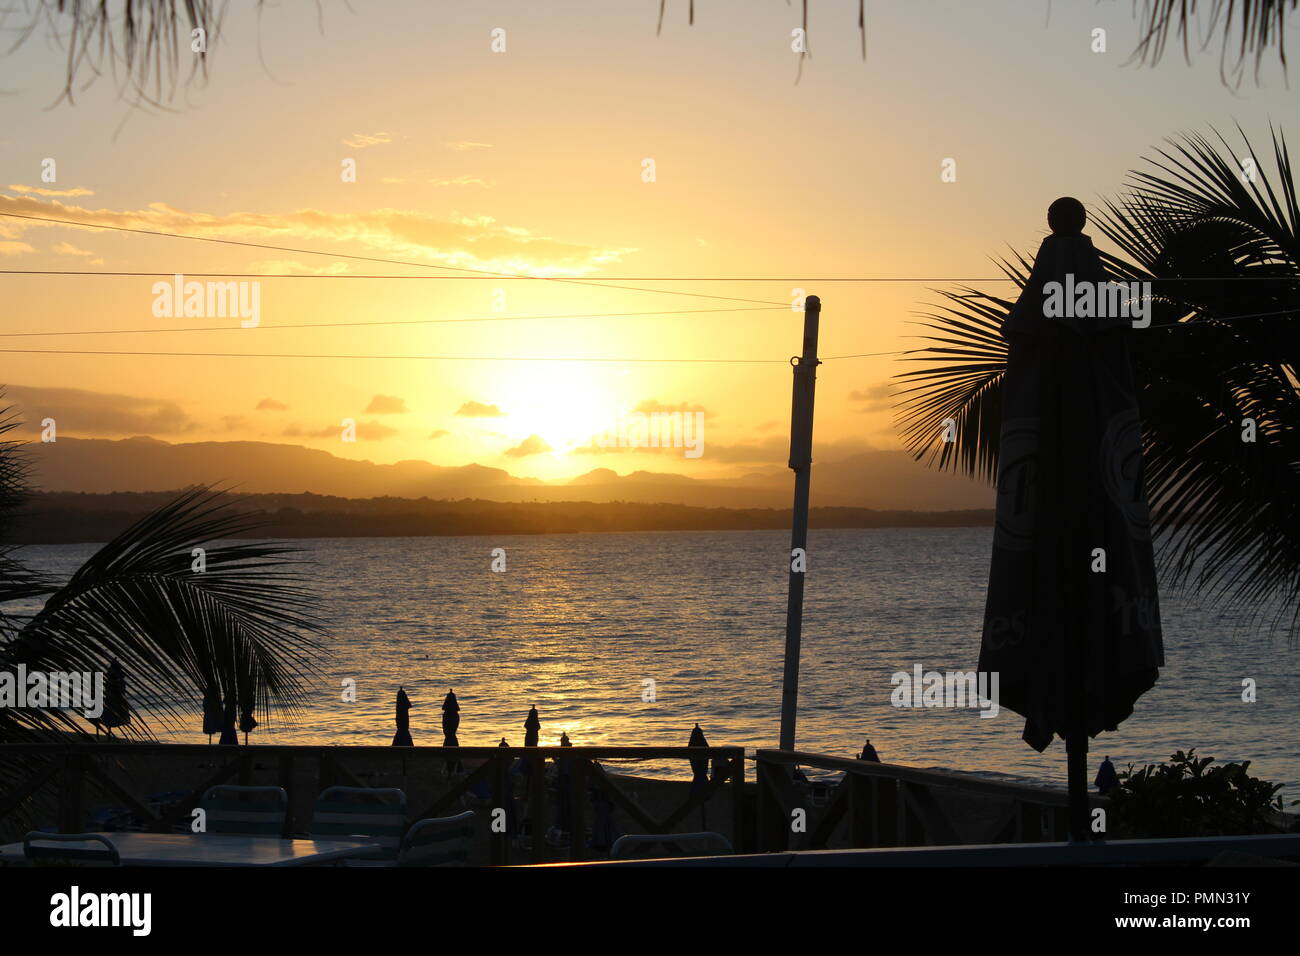 Sunset across the bay in Sosua, Dominican Republic with beach umbrella and palm trees in silhouette Stock Photo